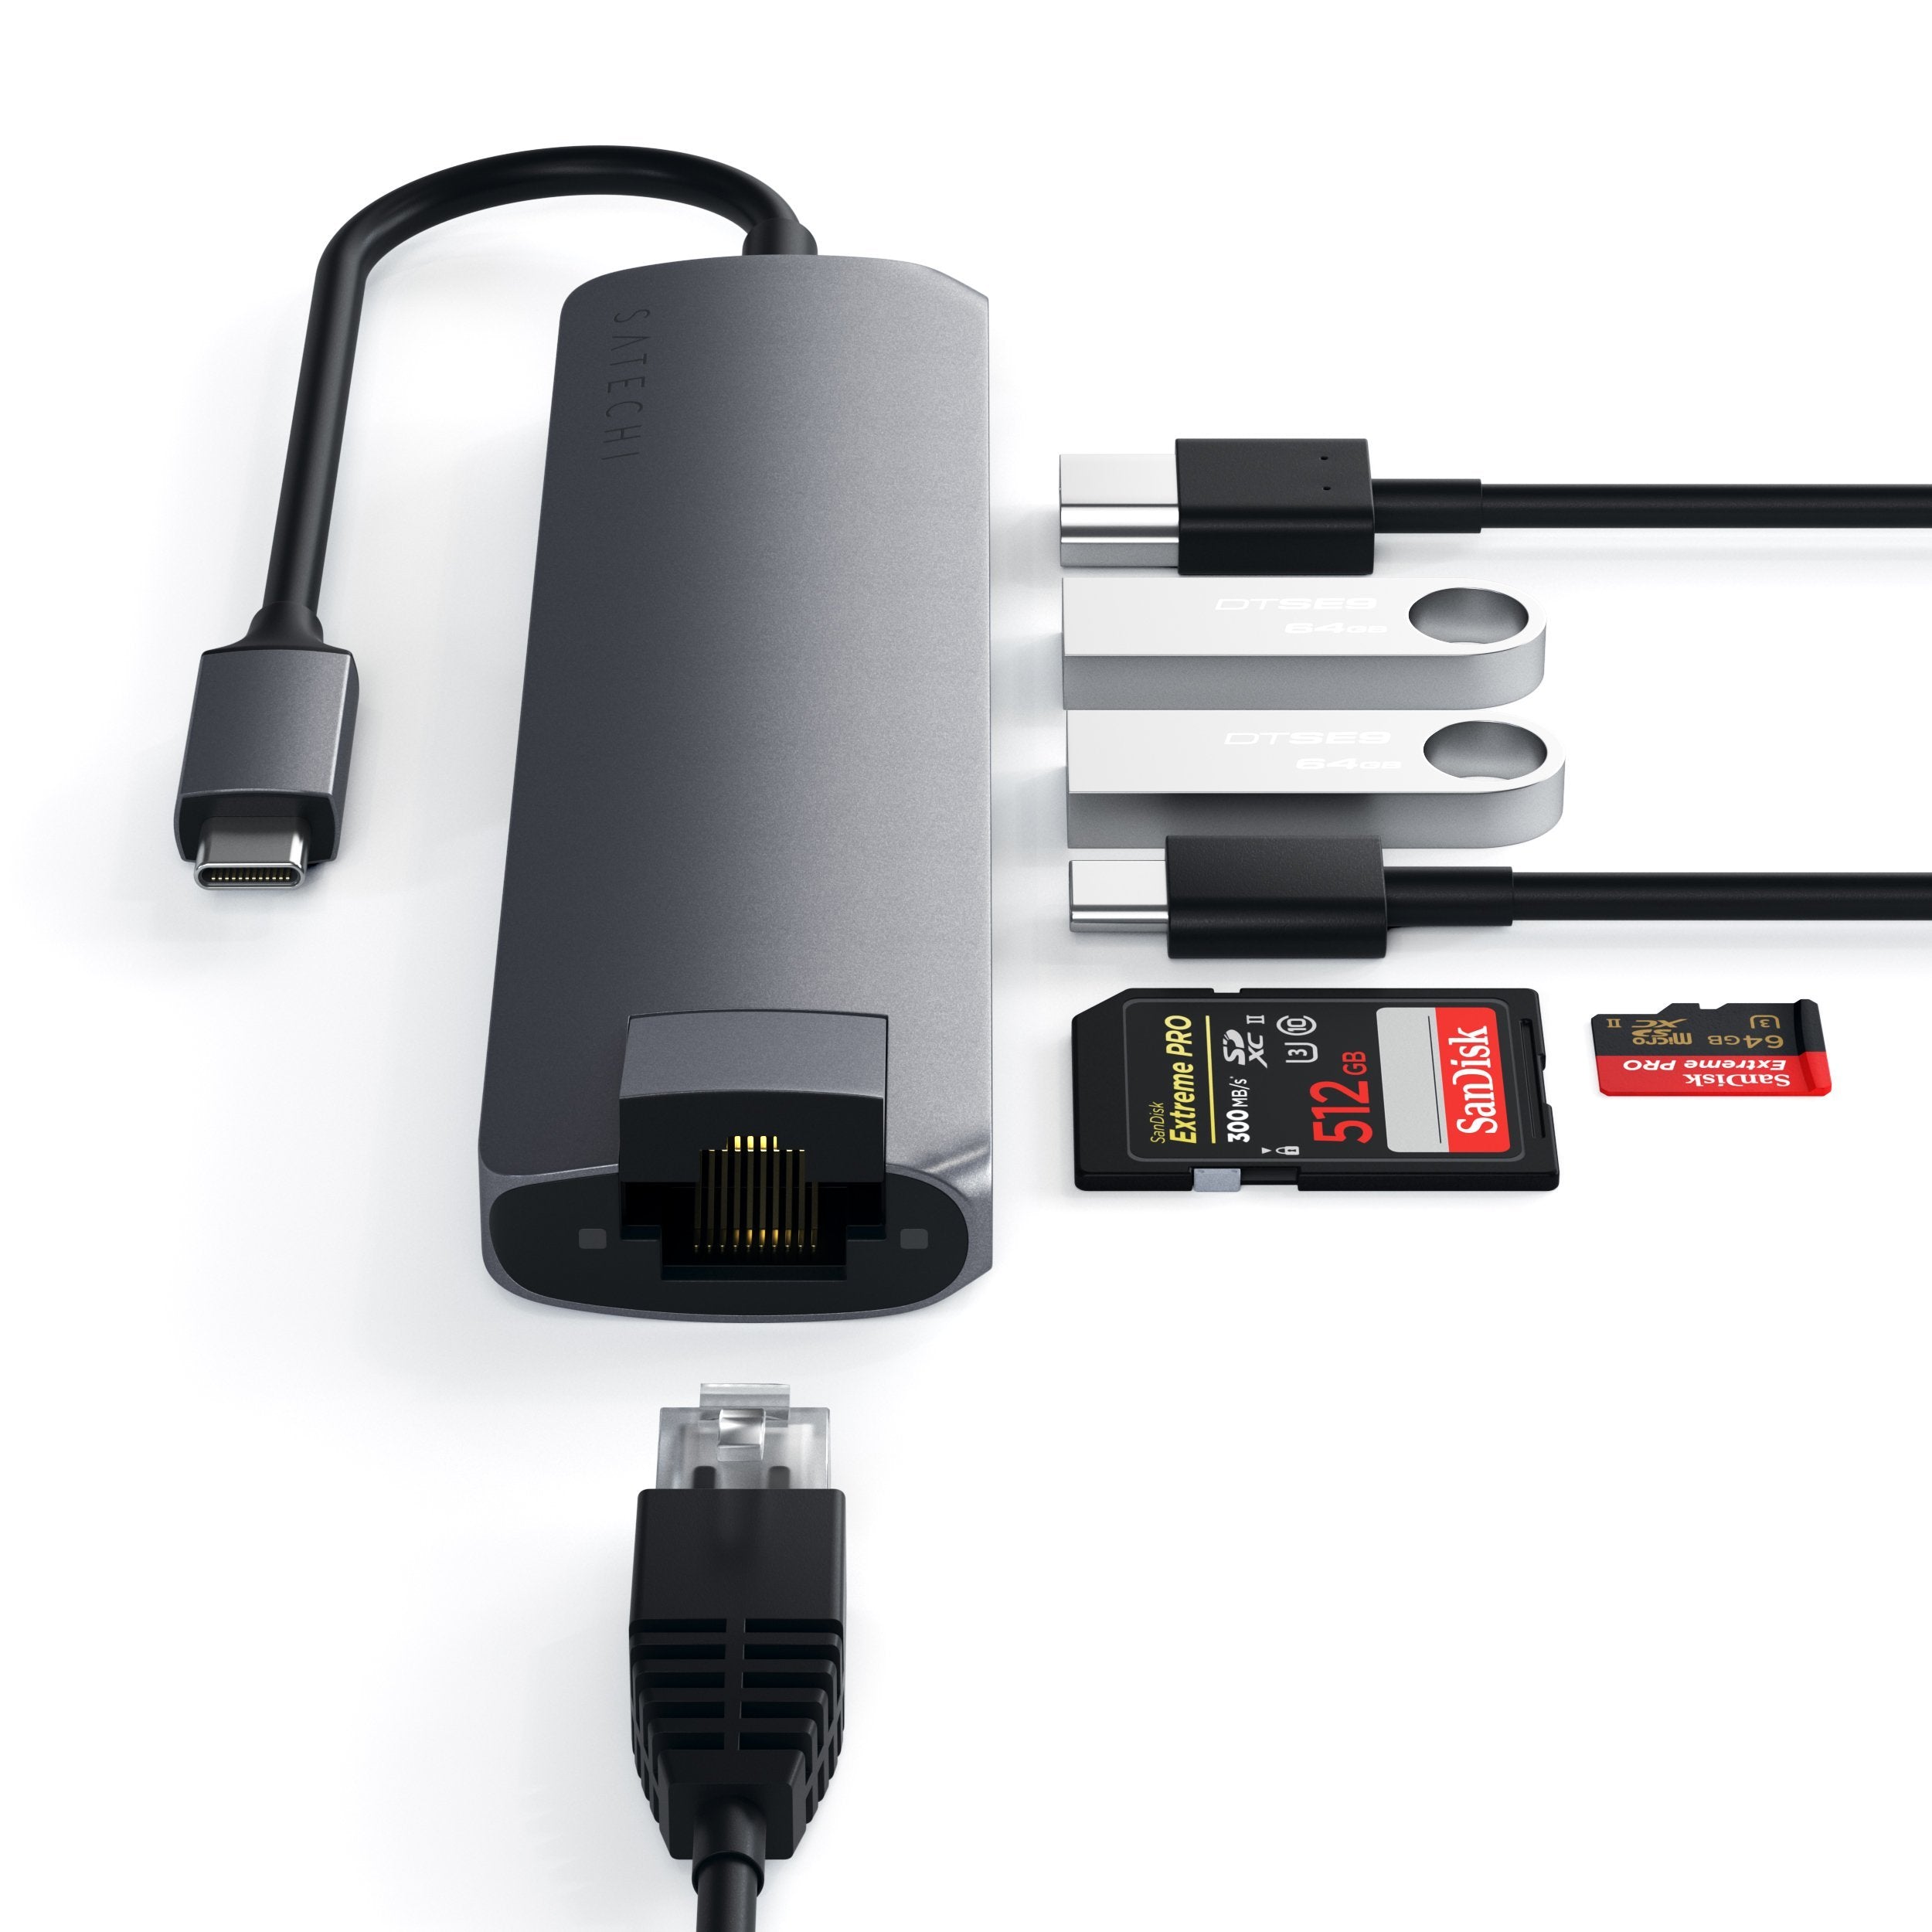 USB-C Multiport Adapter, 4K HDMI, USB-A, Ethernet, PD Charging